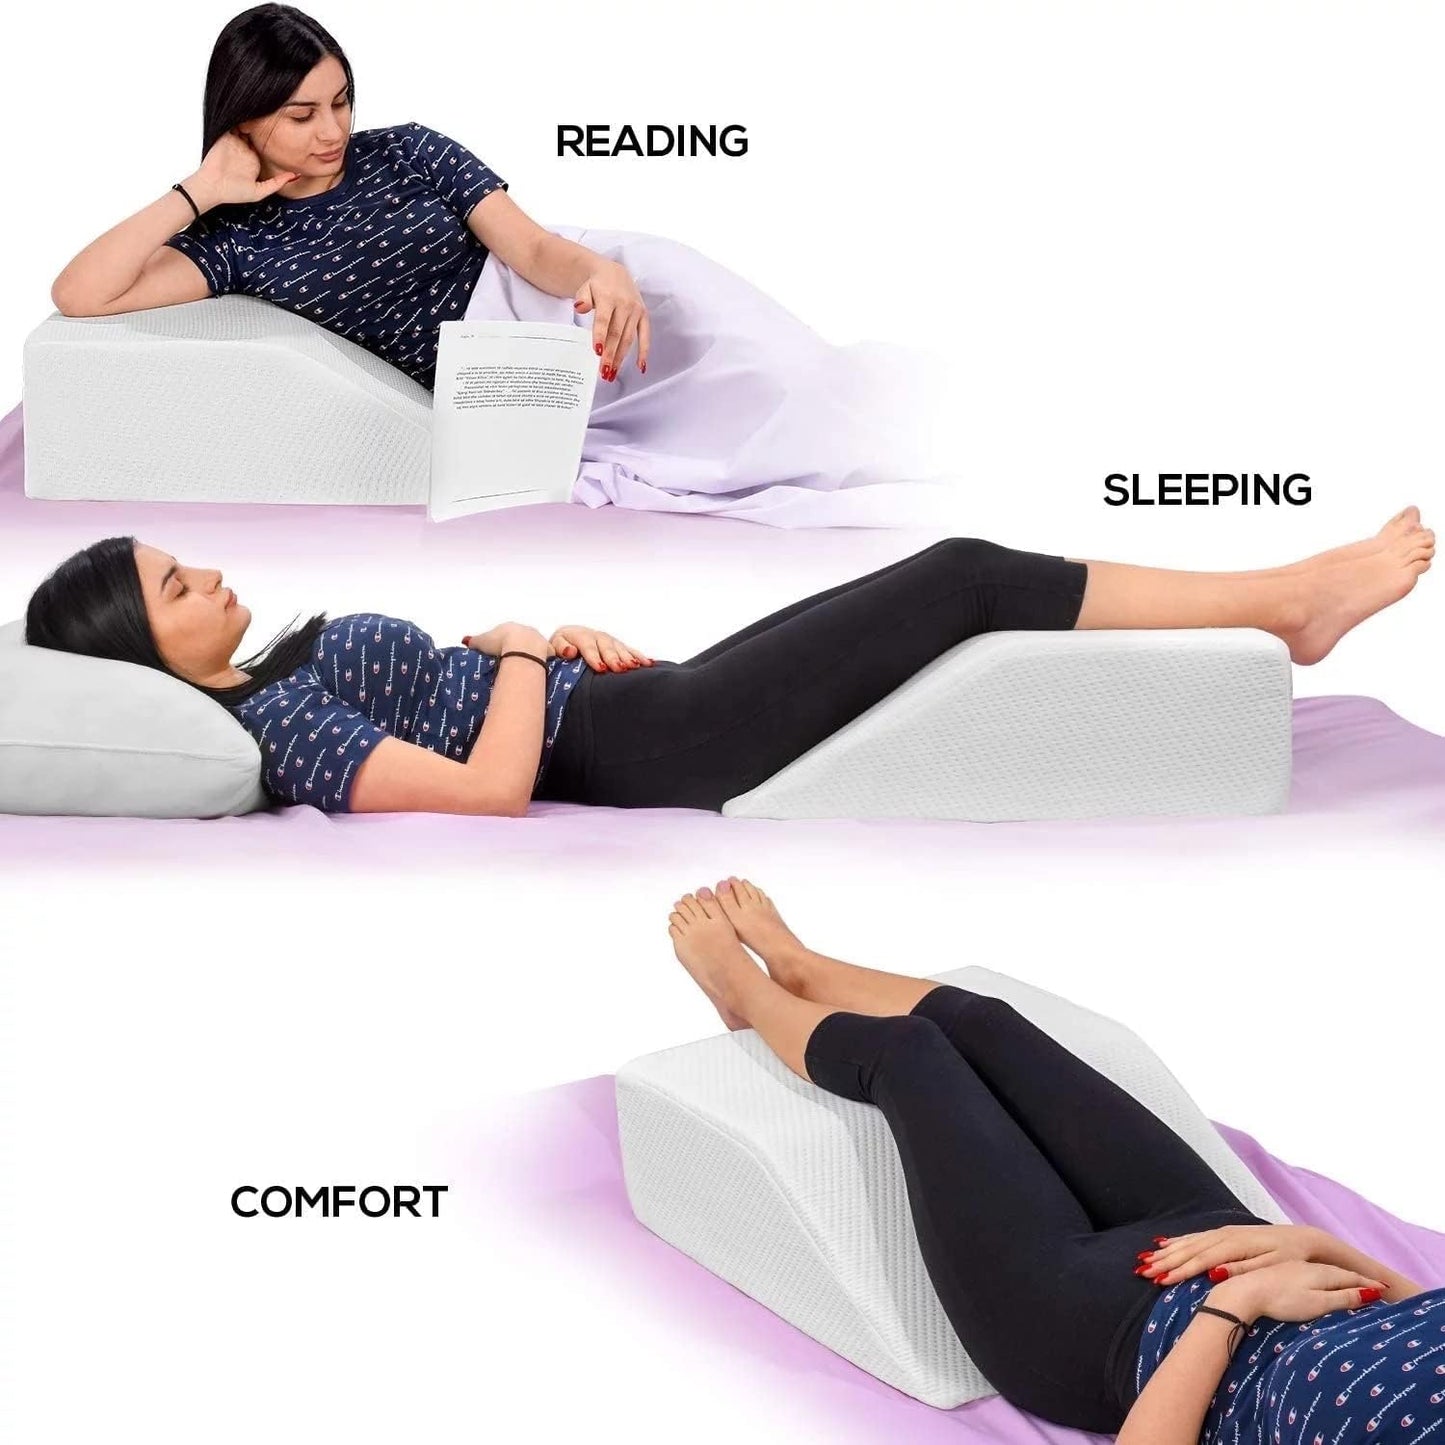 Leg Elevation Pillow, Wedge Memory Foam Support Cushion with Washable Cover, Improve Circulation & Reduce Pain, Bed Leg Rest Pillow for Post Surgery, Reading, Sleeping